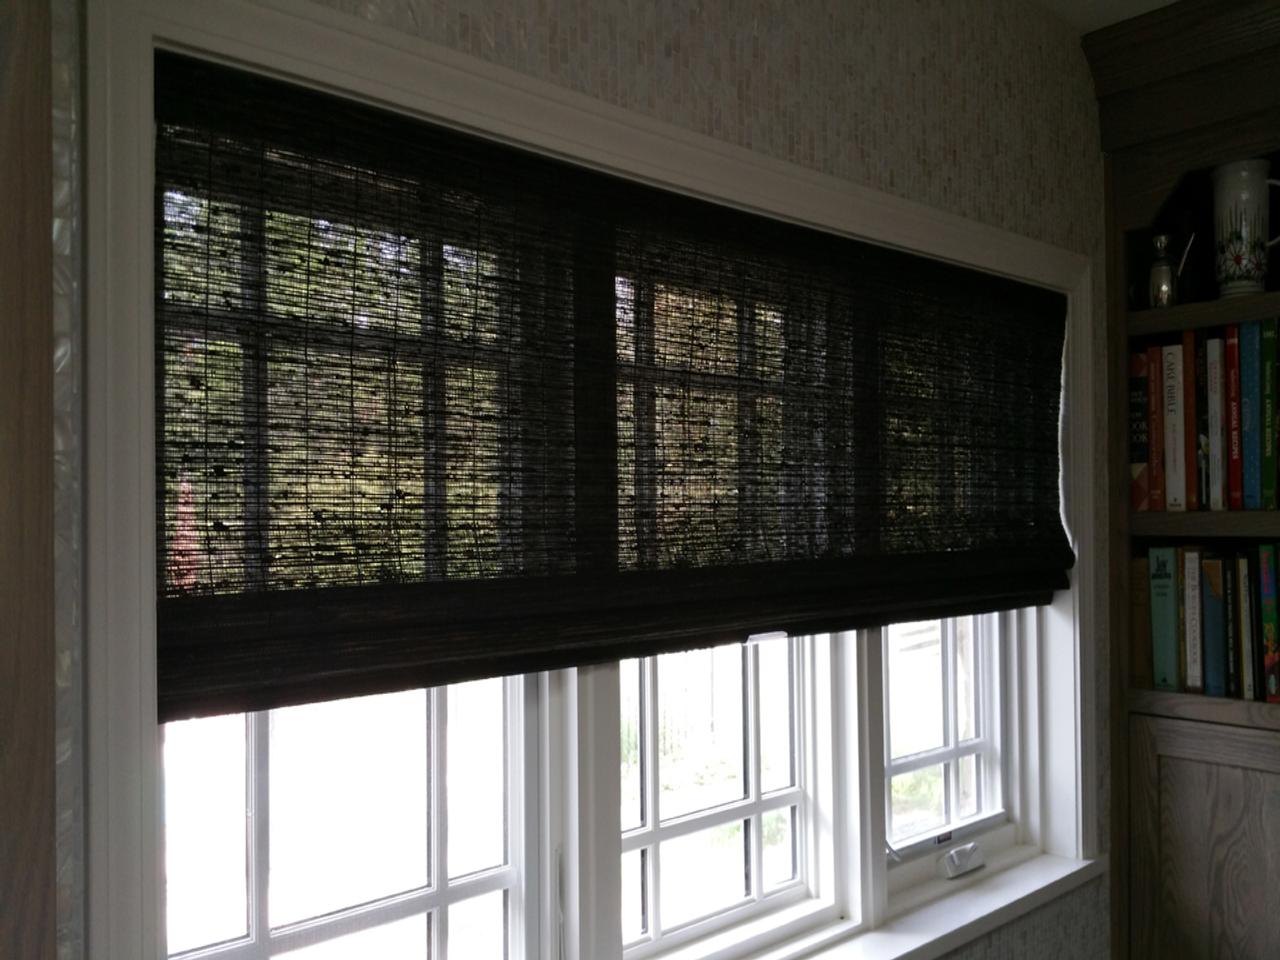 Woven wood shades in a bedroom